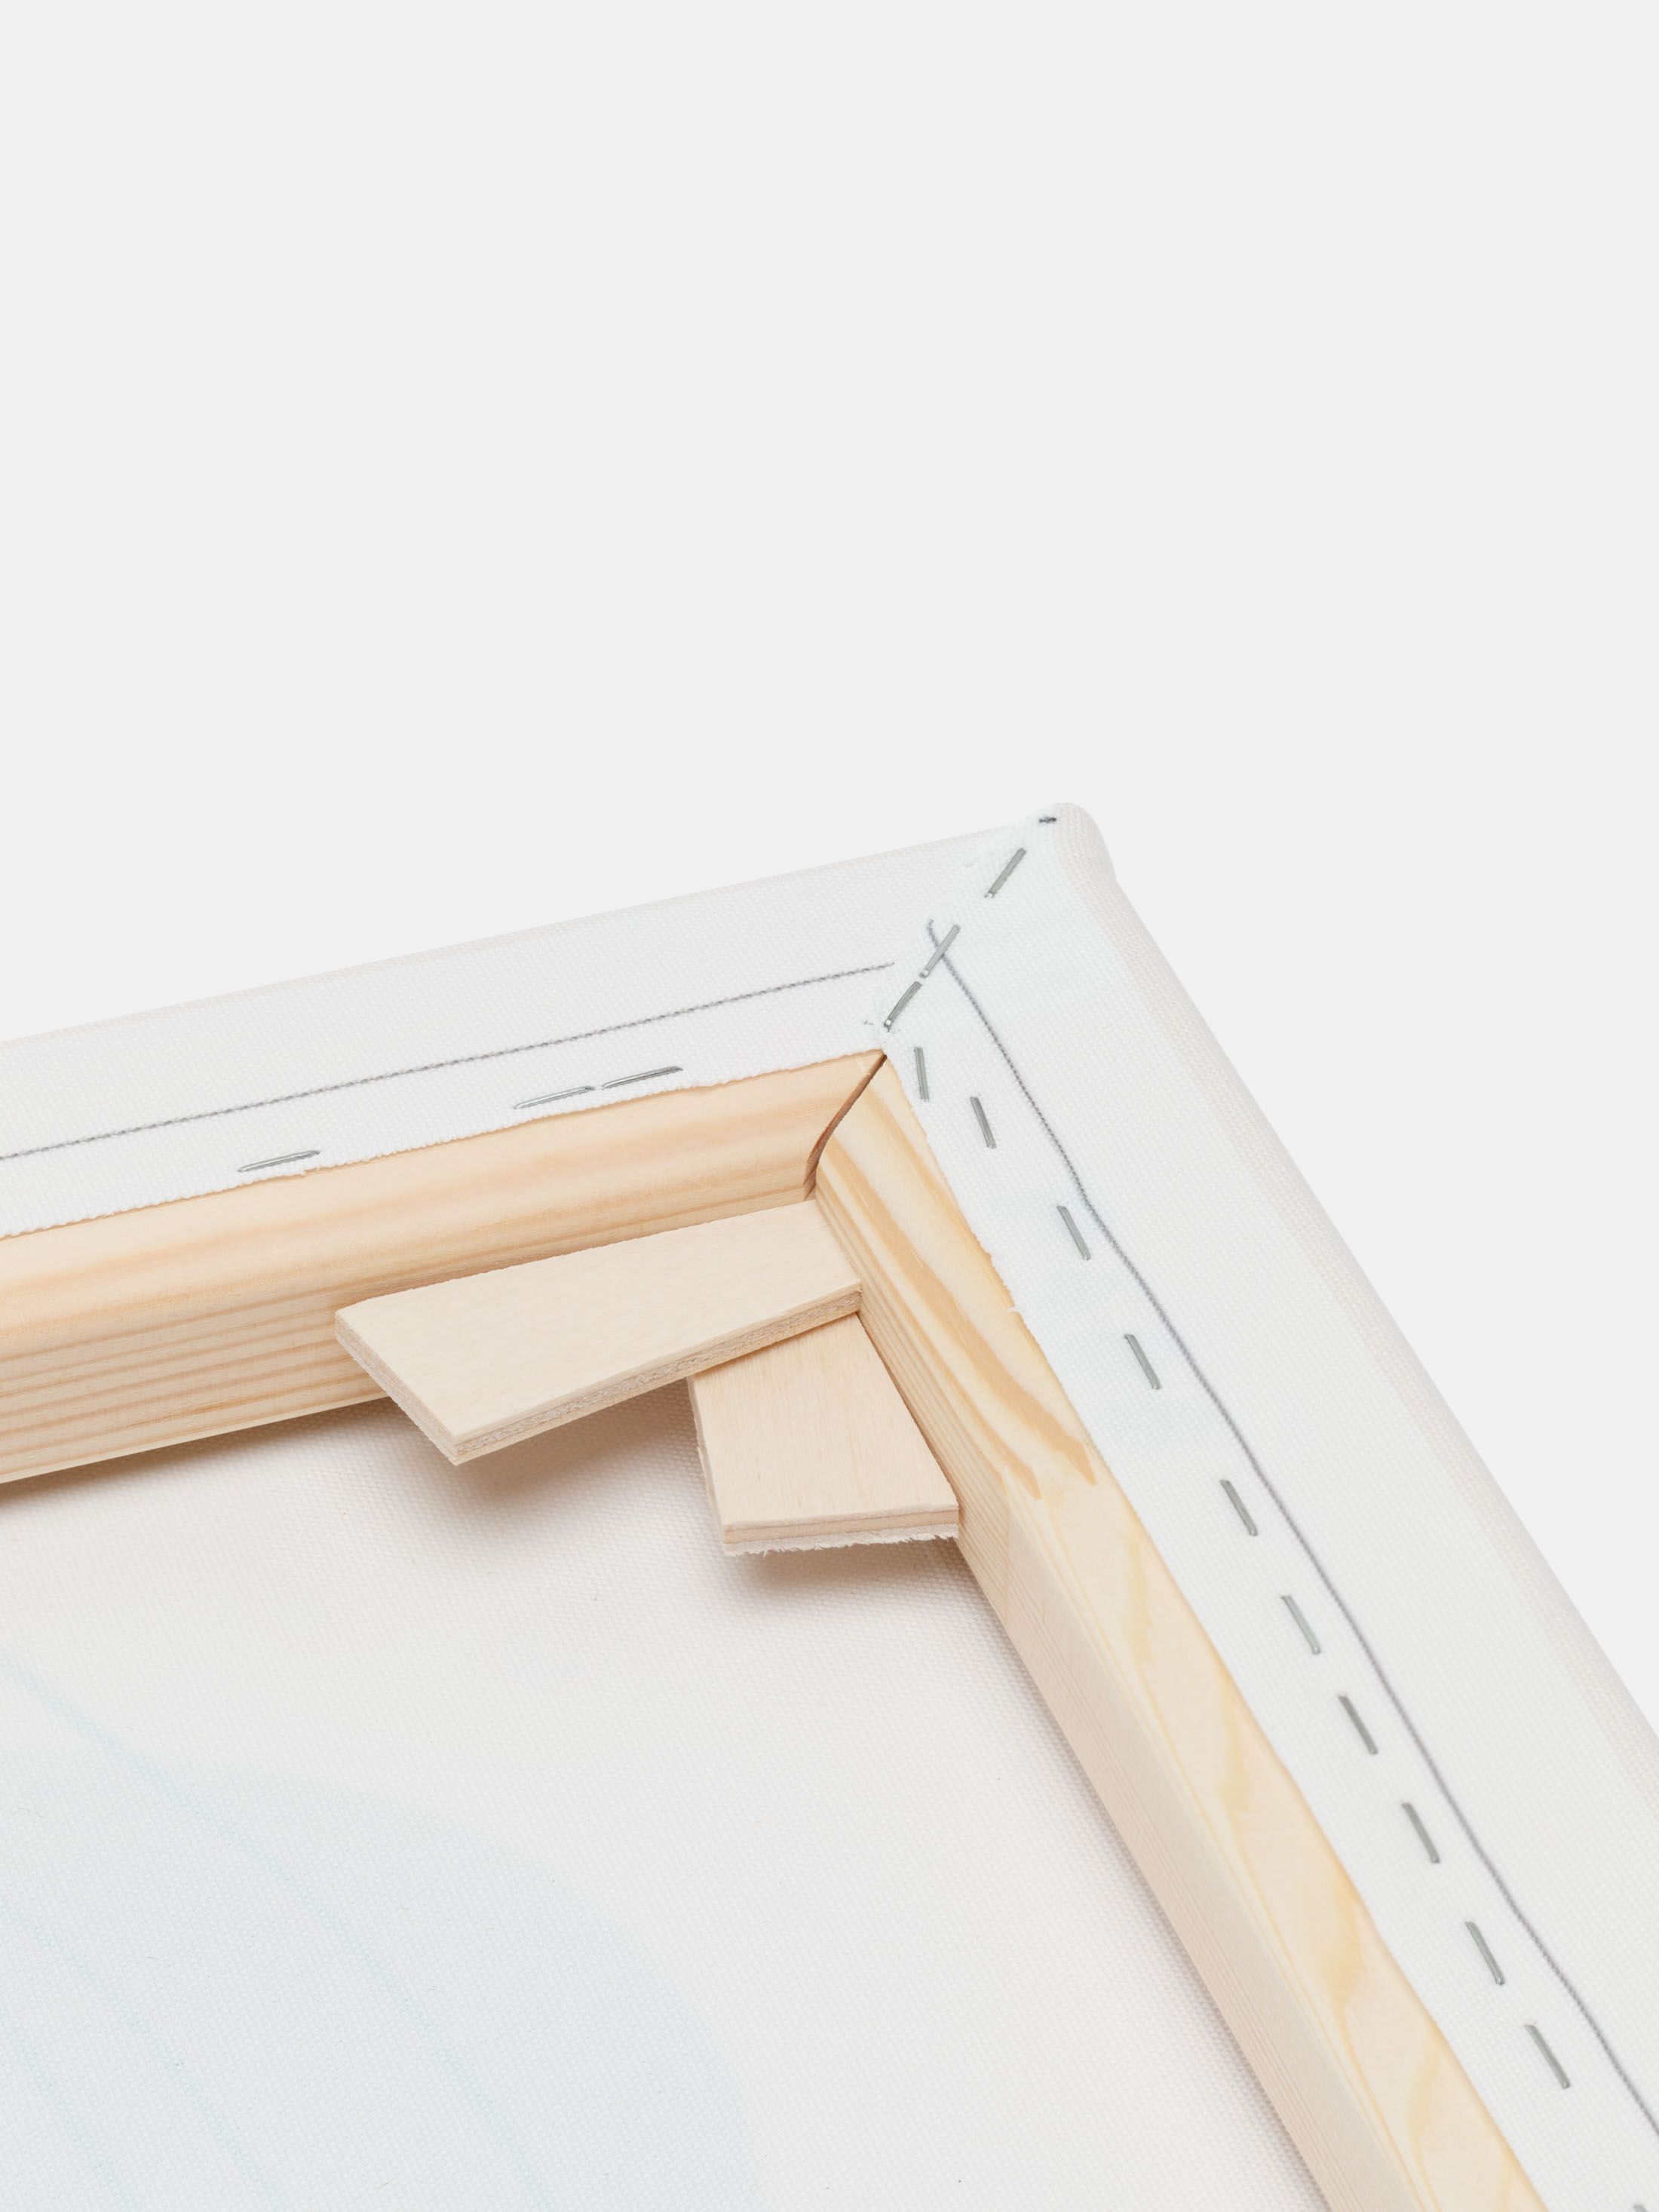 design your own canvas art with FSC certified stretcher bars